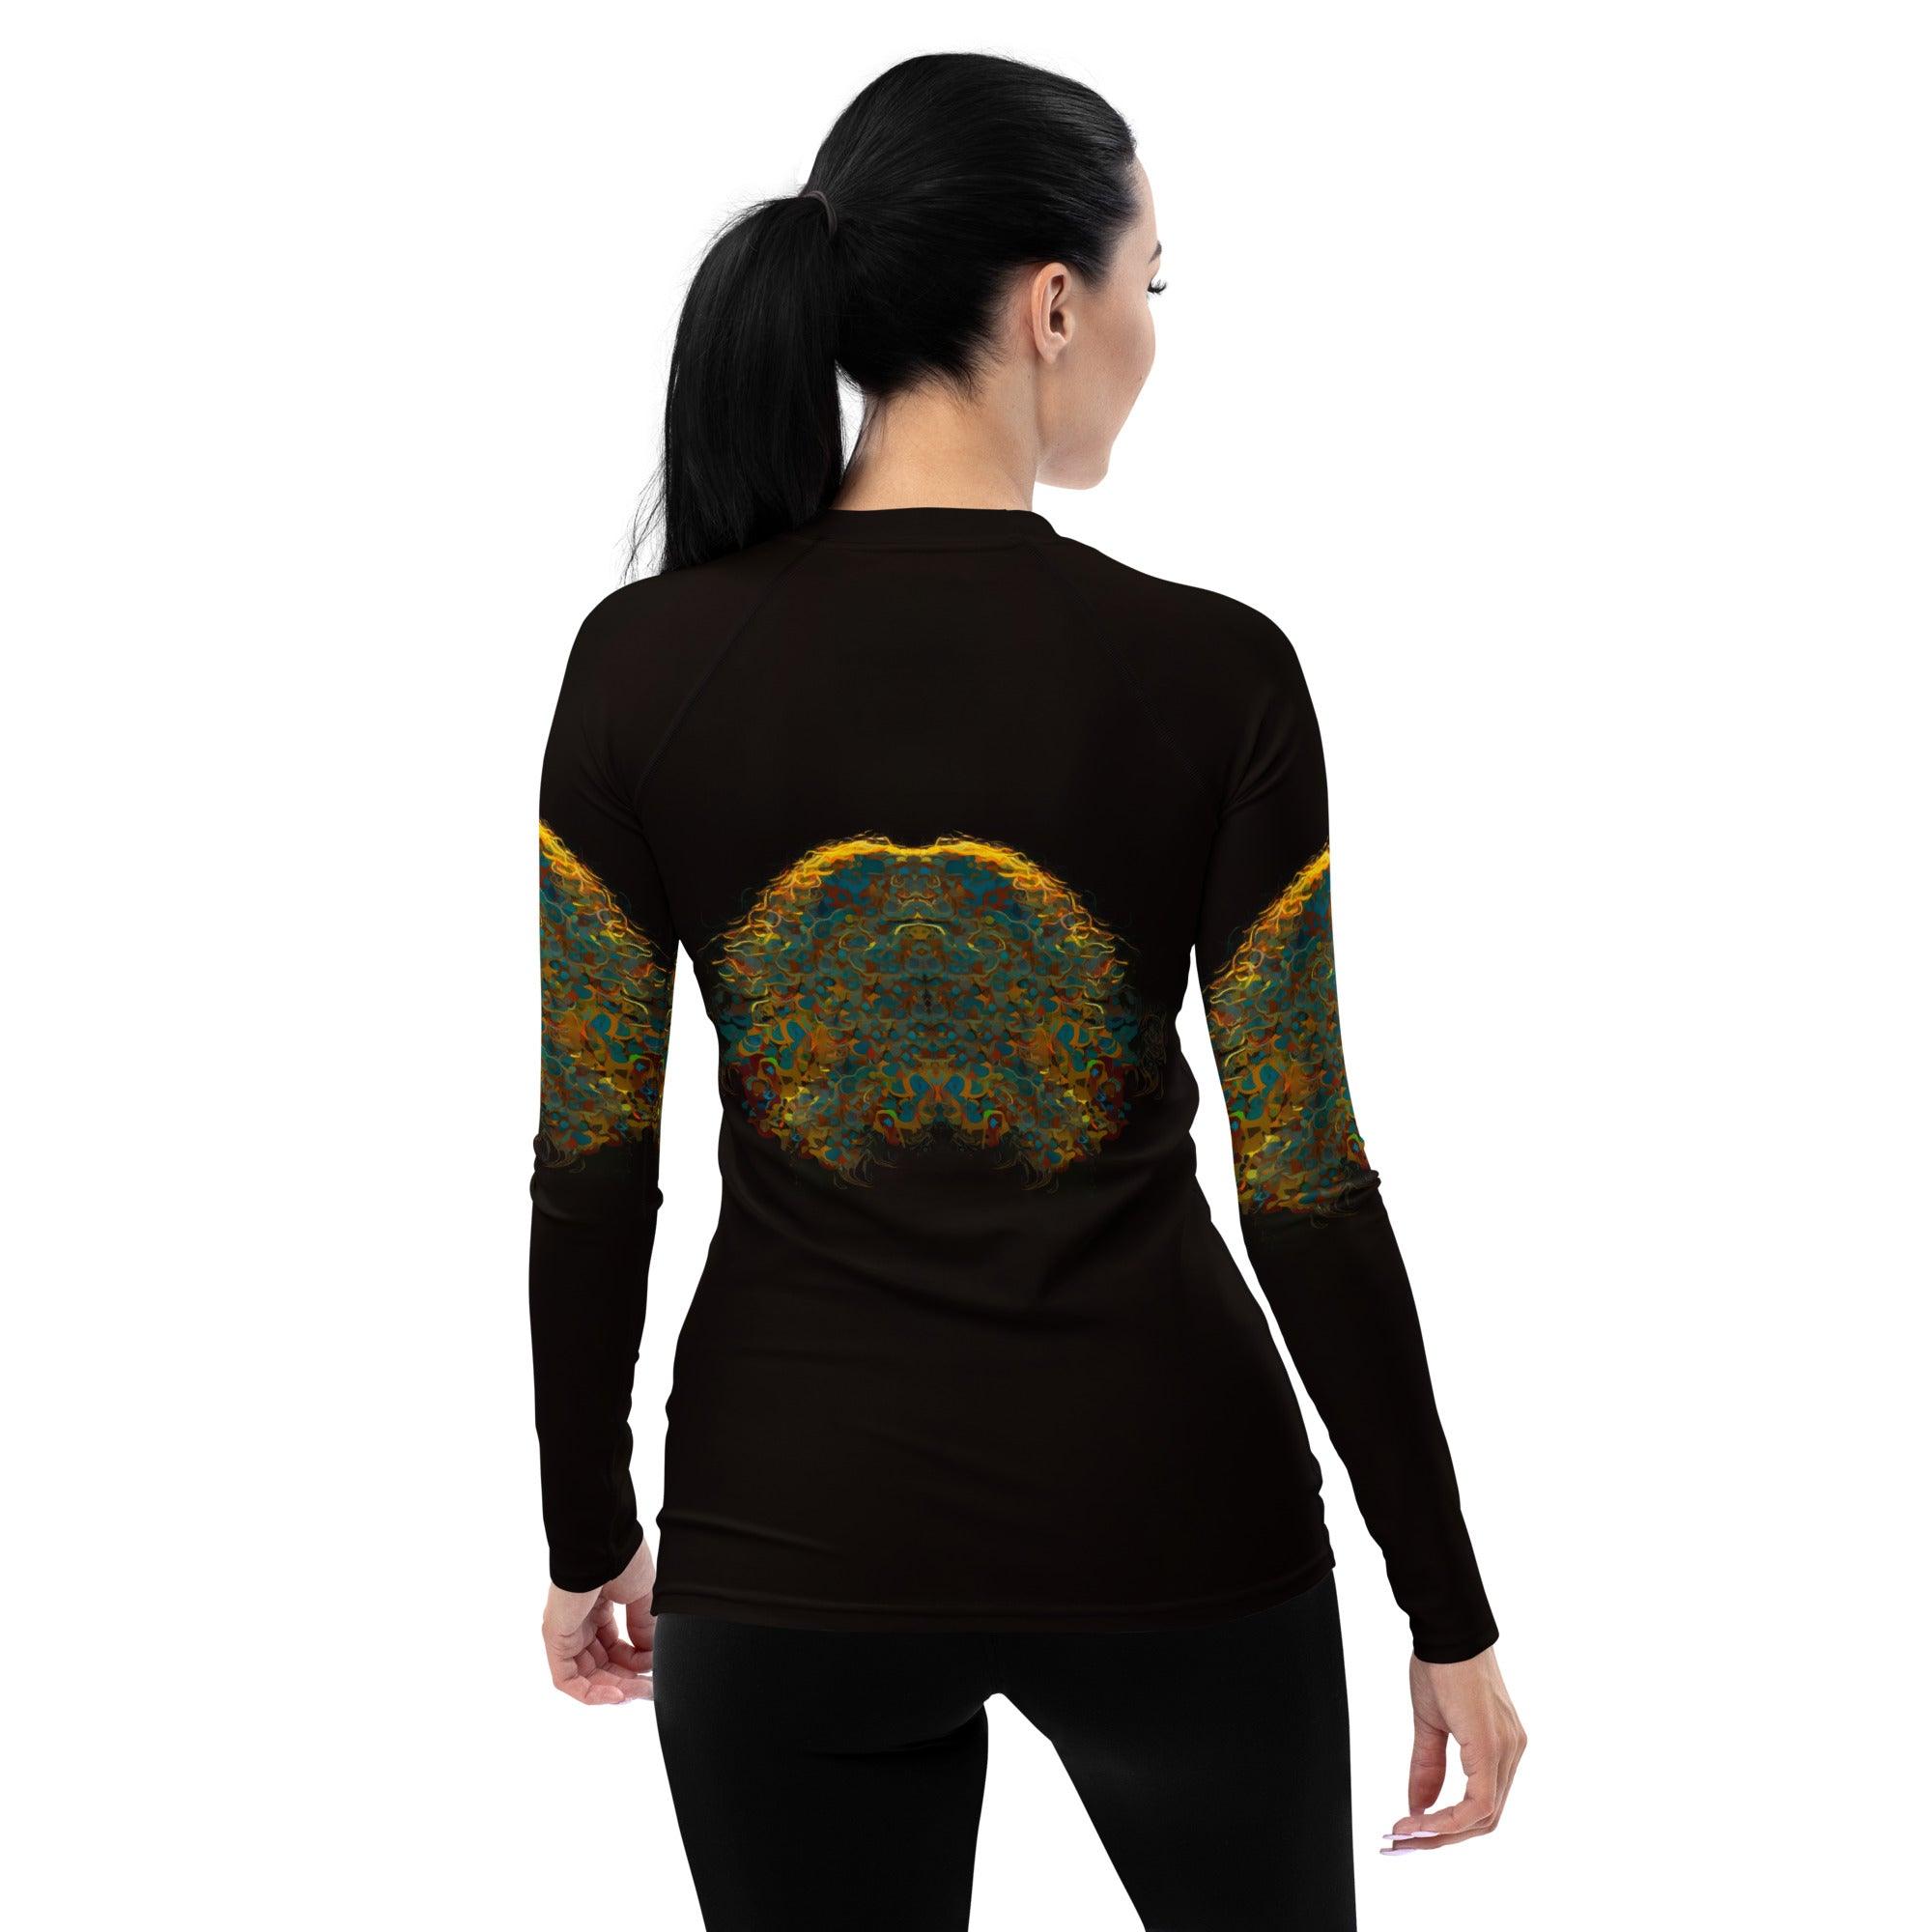 Detailed view of the SurArt 129 Rash Guard's durable and stylish material